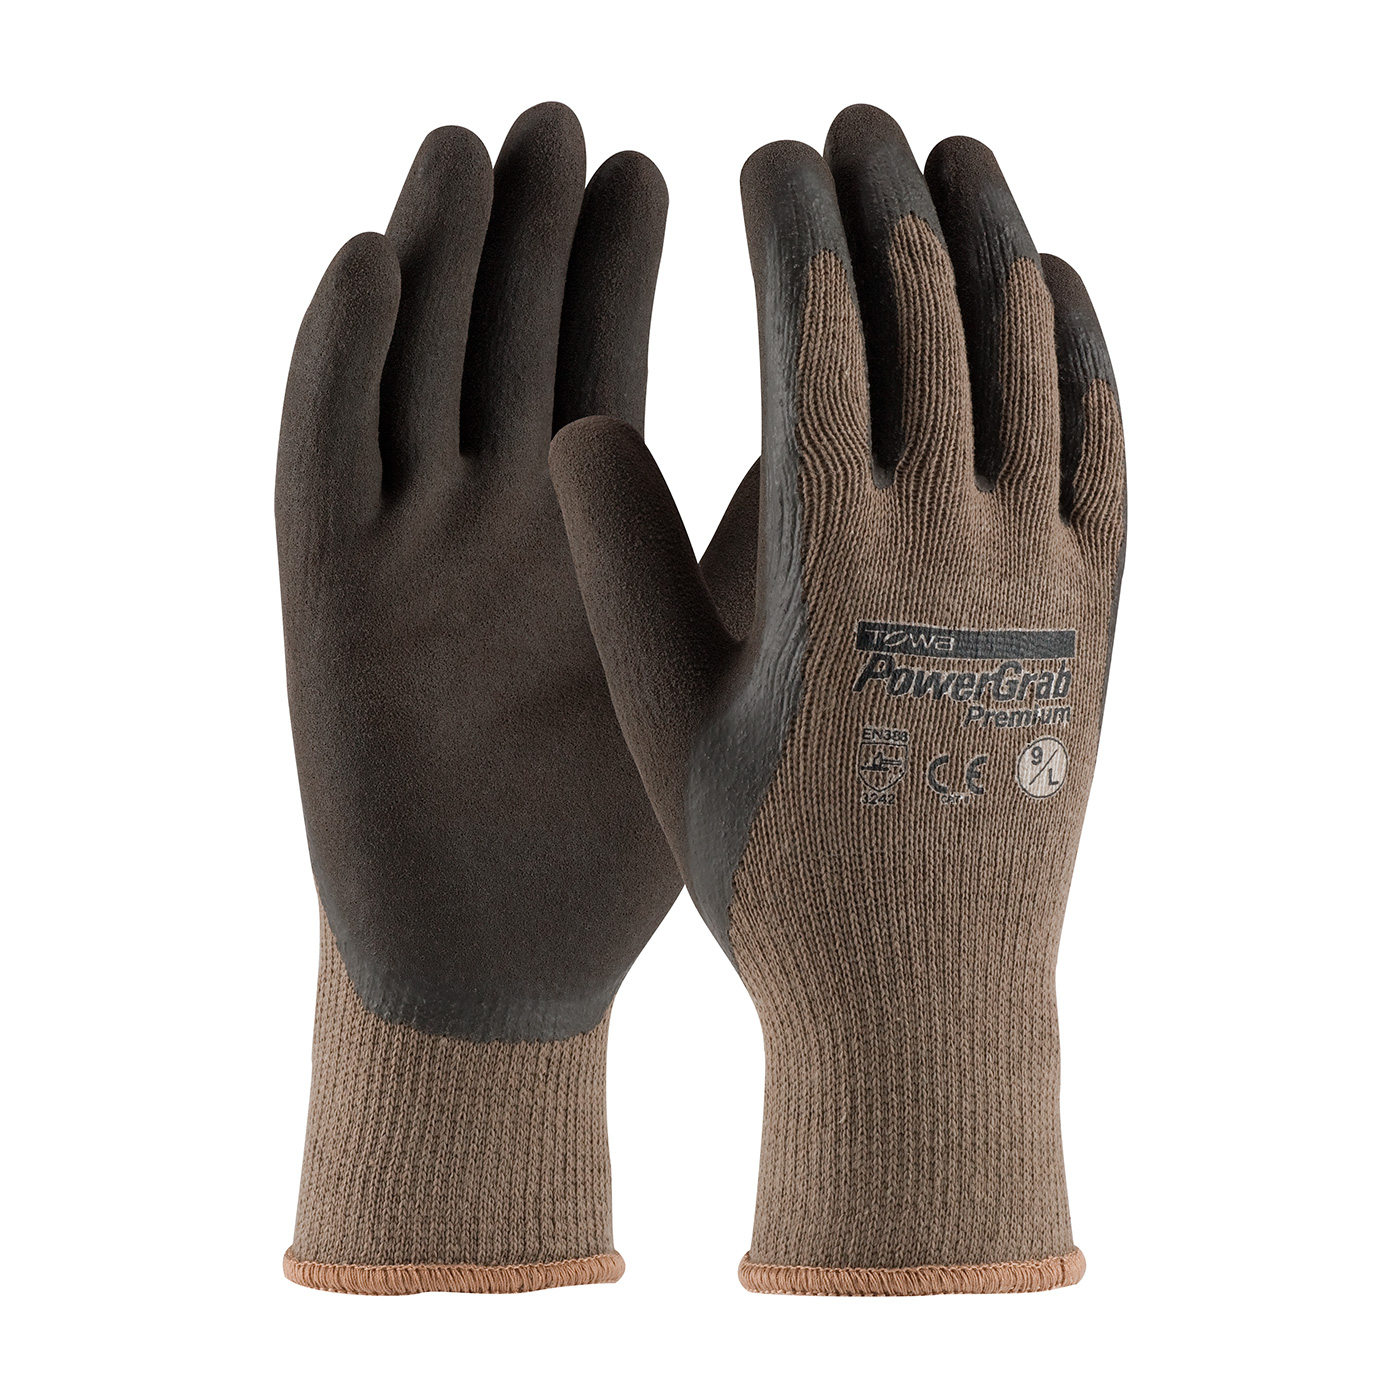 PIP 39-C1500/XL PowerGrab Premium Seamless Knit Cotton/Polyester Glove with Latex Coated MicroFinish Grip on Palm & Fingers - X-Large PID-39 C1500 XL